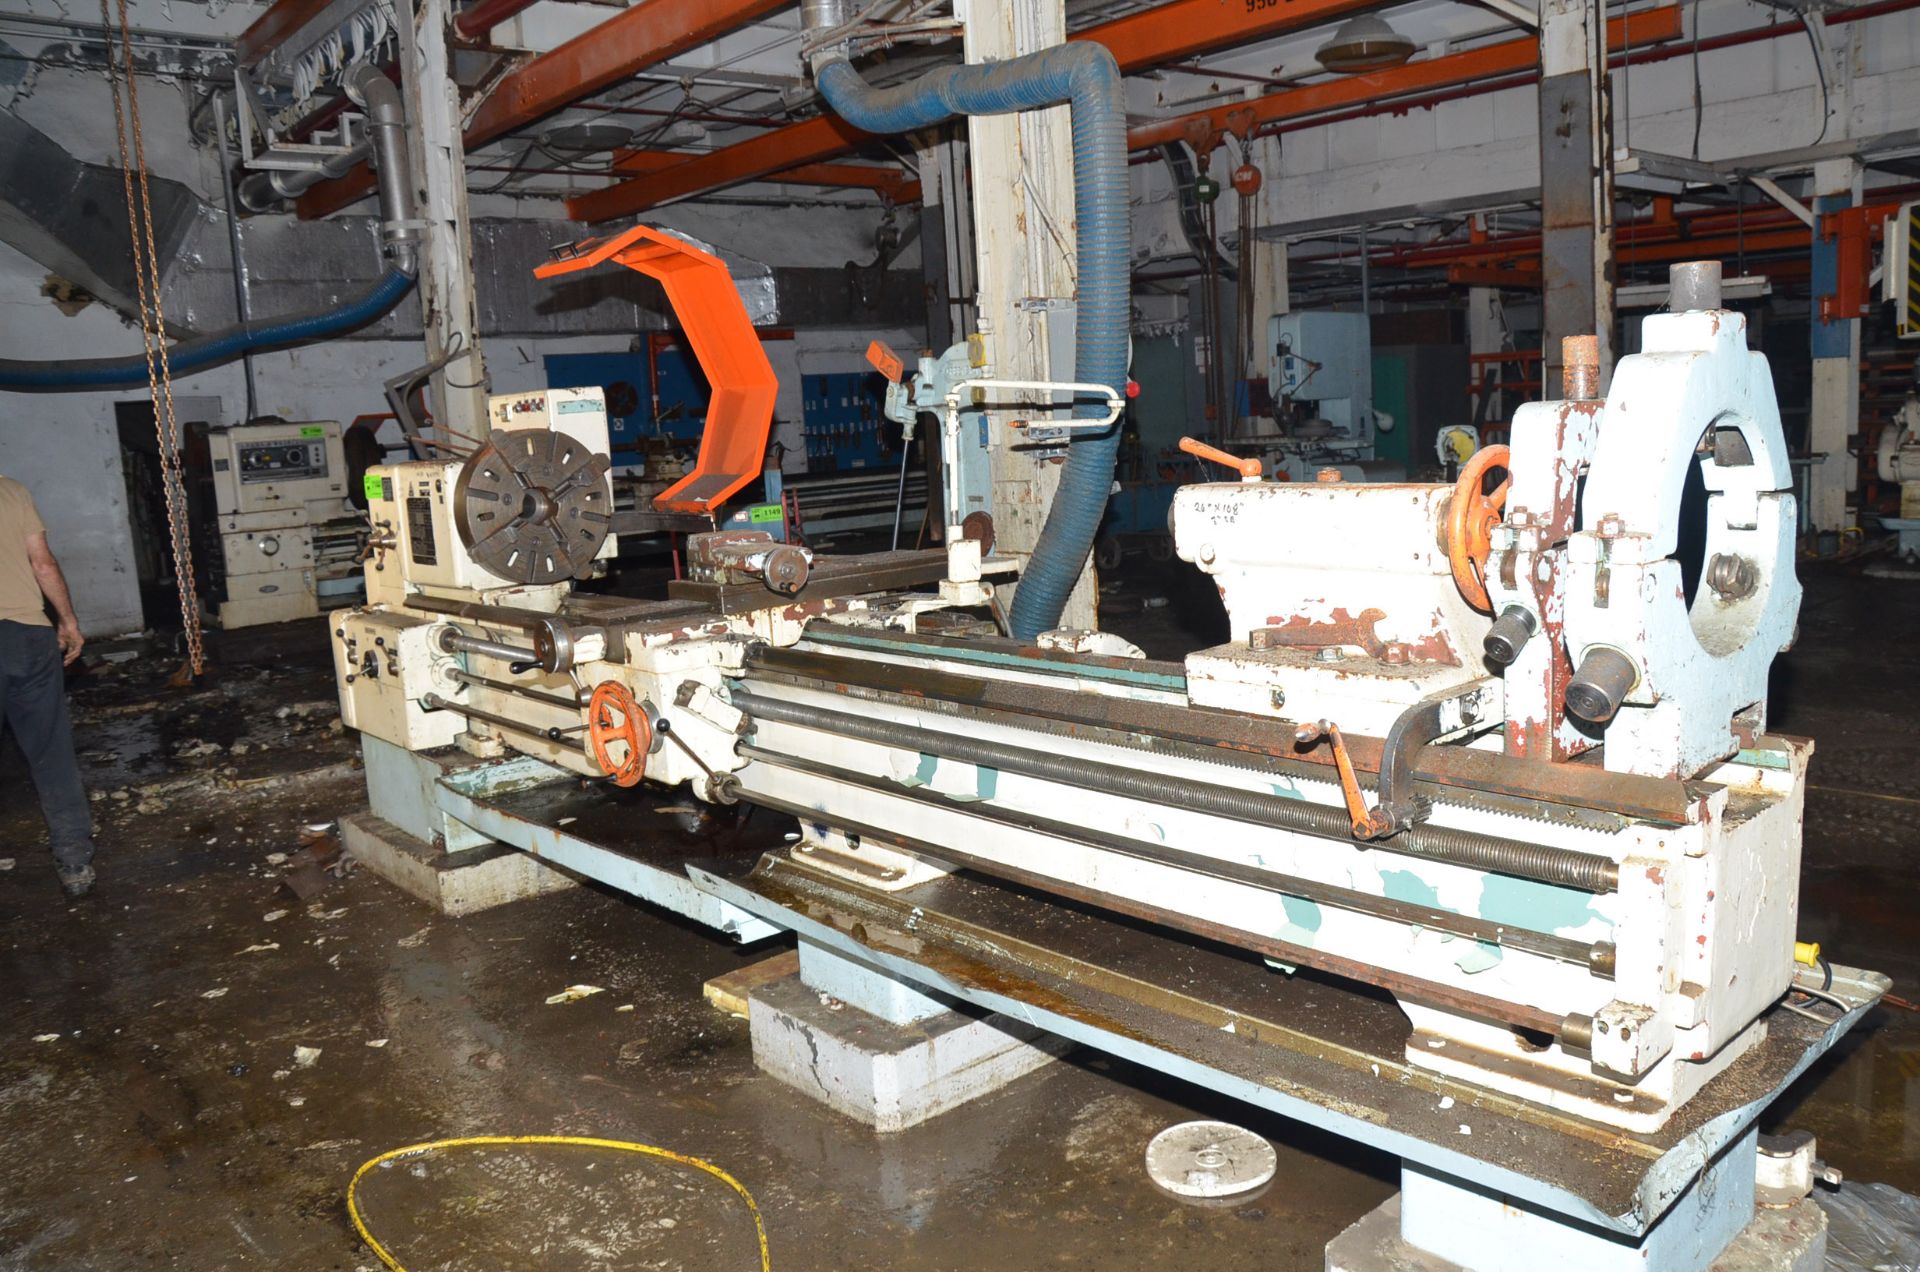 TOS SN63B GAP BED ENGINE LATHE WITH 25" SWING OVER BED, 28" SWING IN THE GAP, 120" DISTANCE